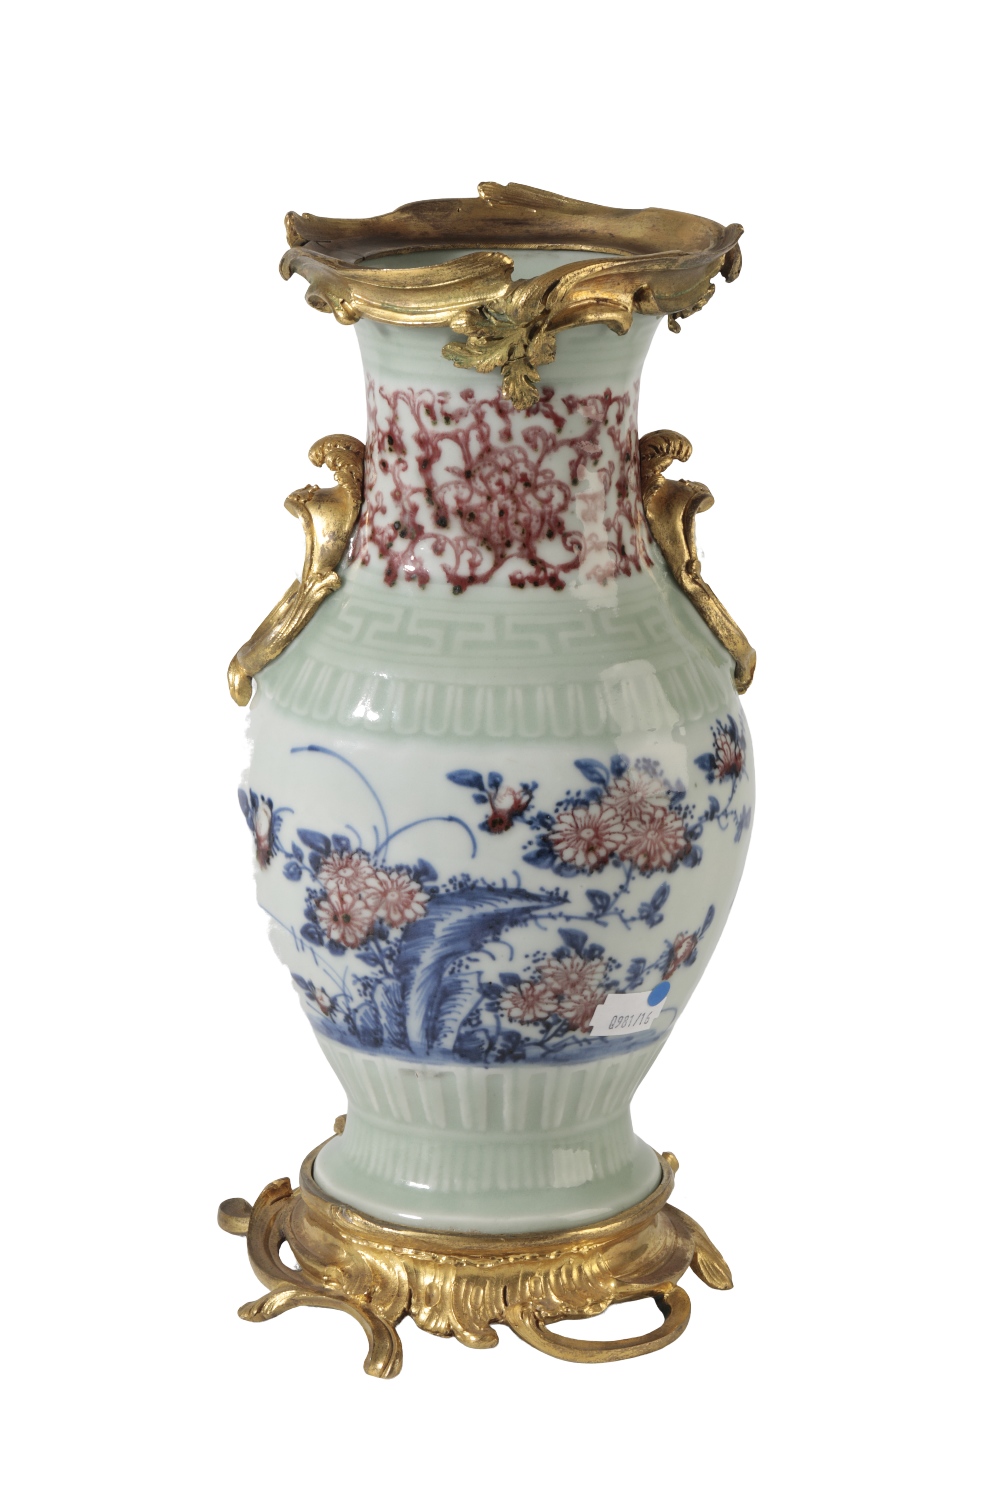 GOOD CELADON AND UNDER GLAZE-BLUE AND IRON-RED BALUSTER VASE, QIANLONG SEAL MARK AND PERIOD